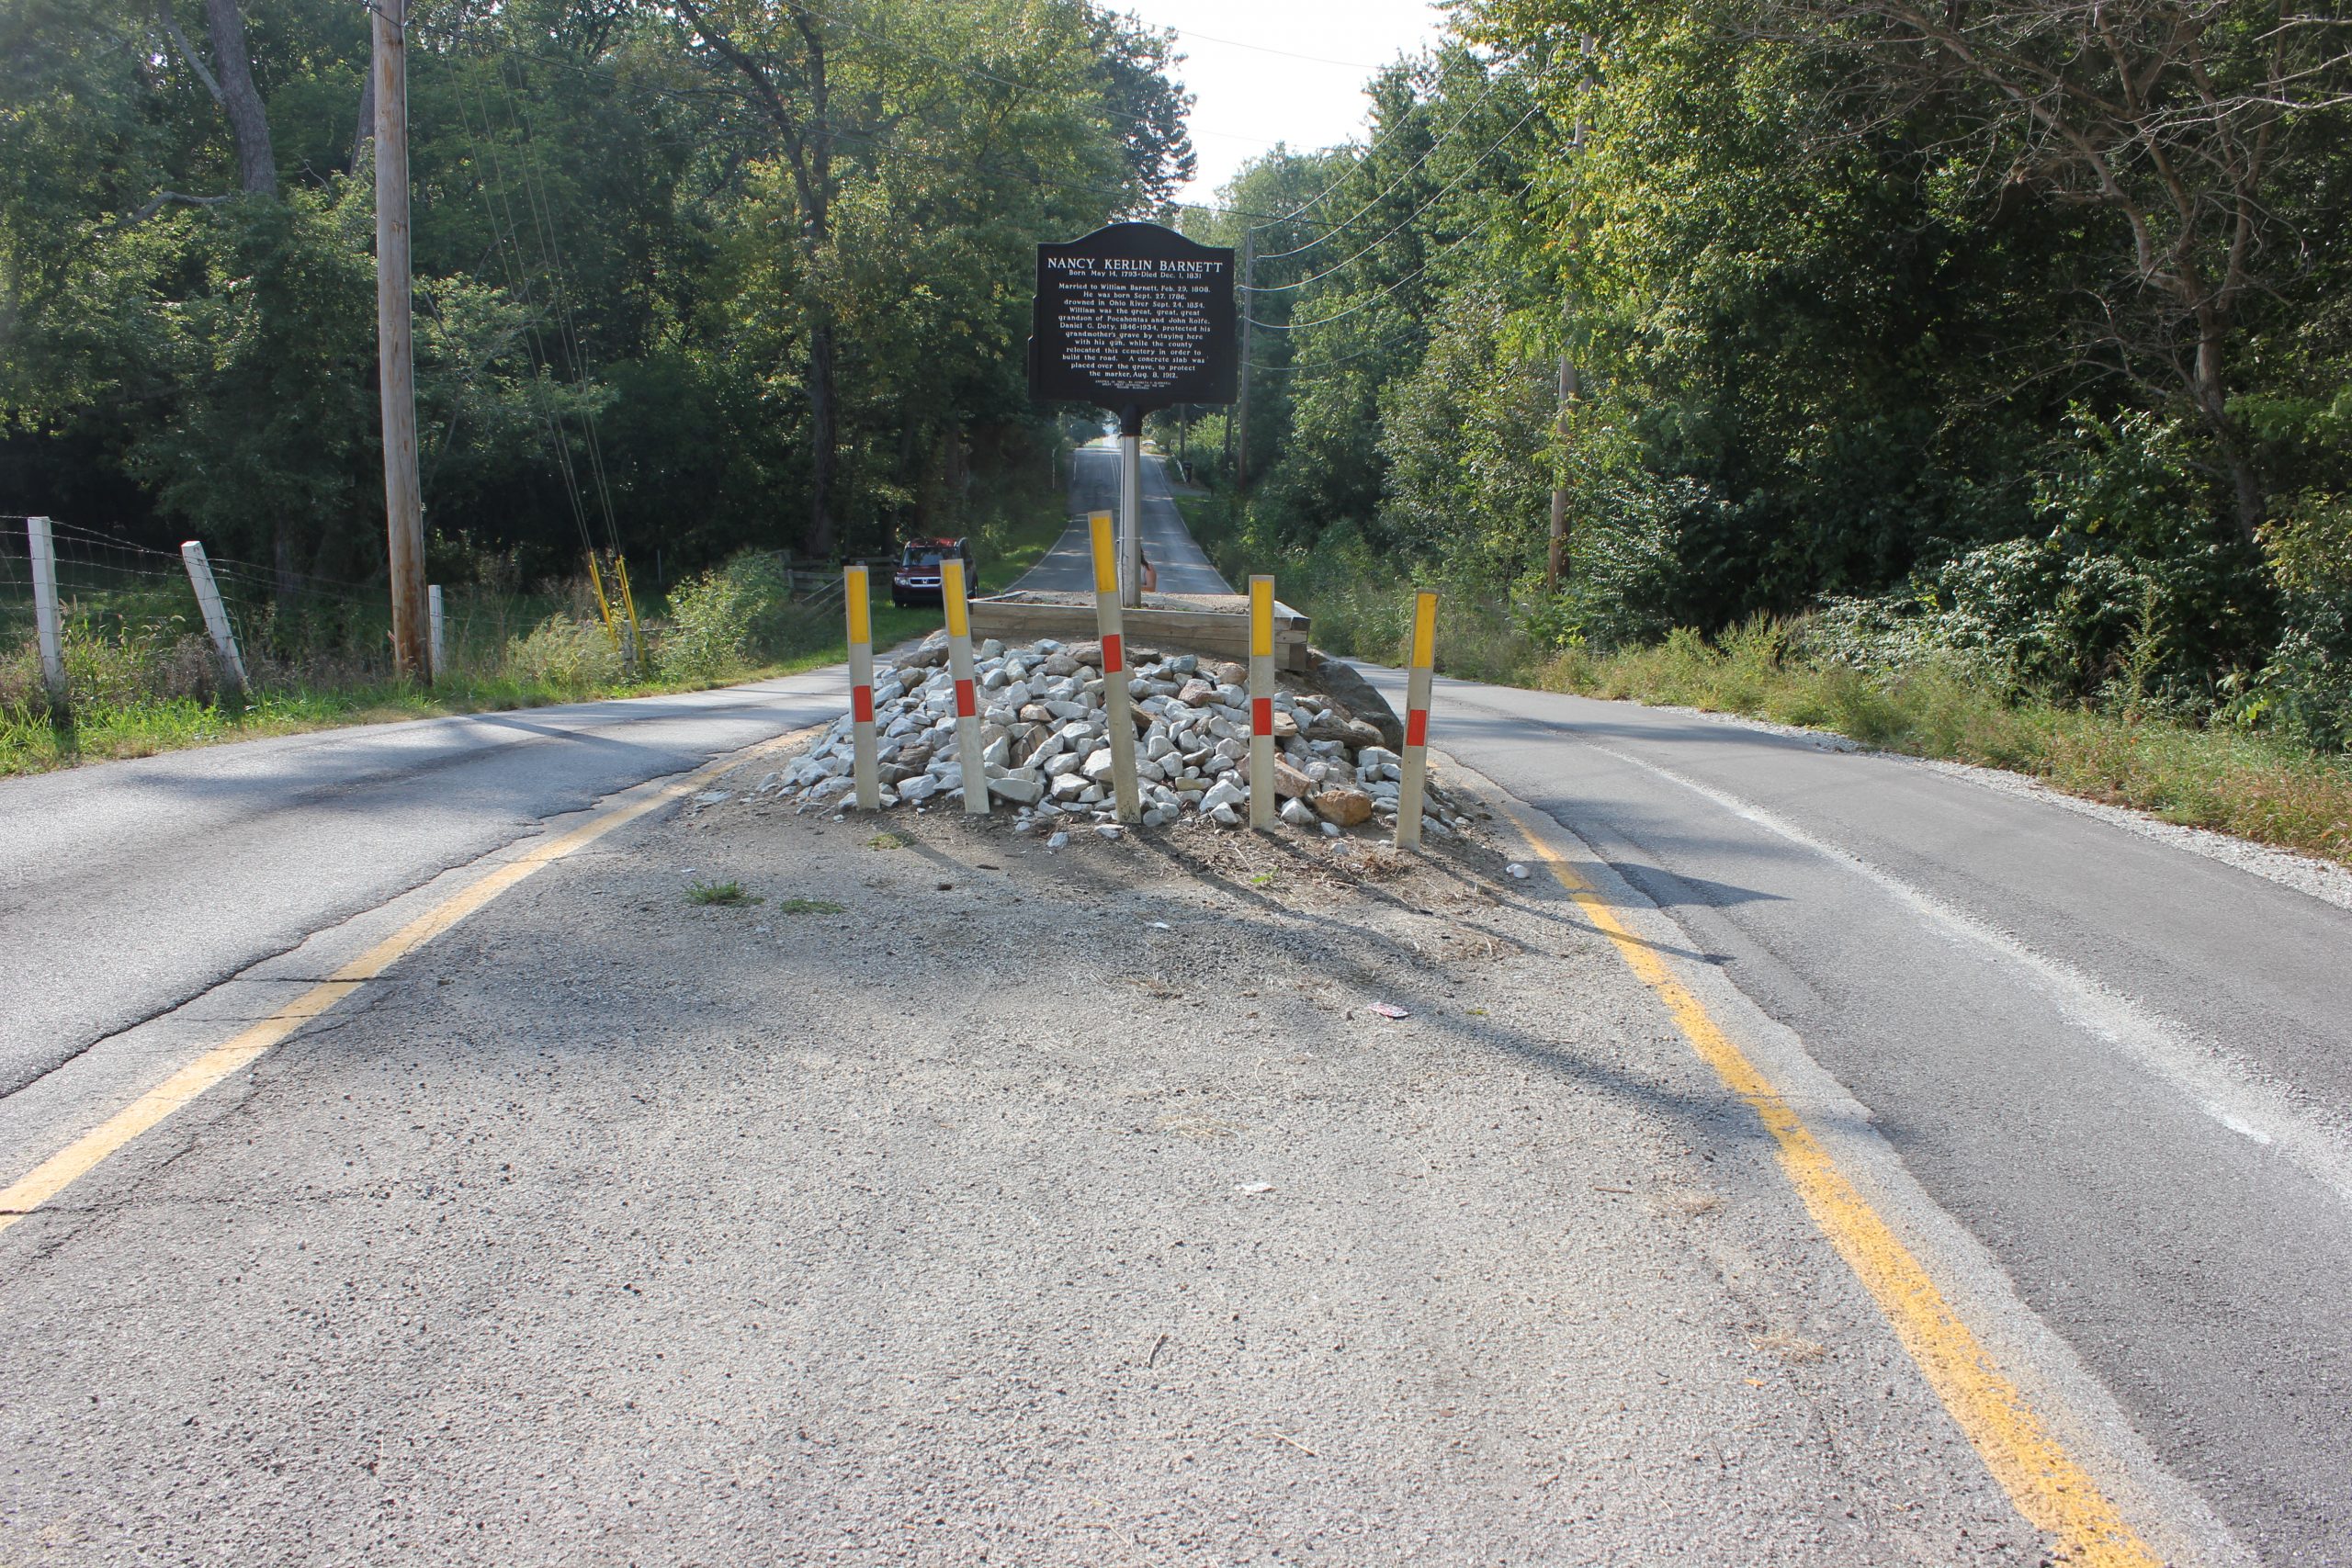 Indiana’s grave in the middle of the road